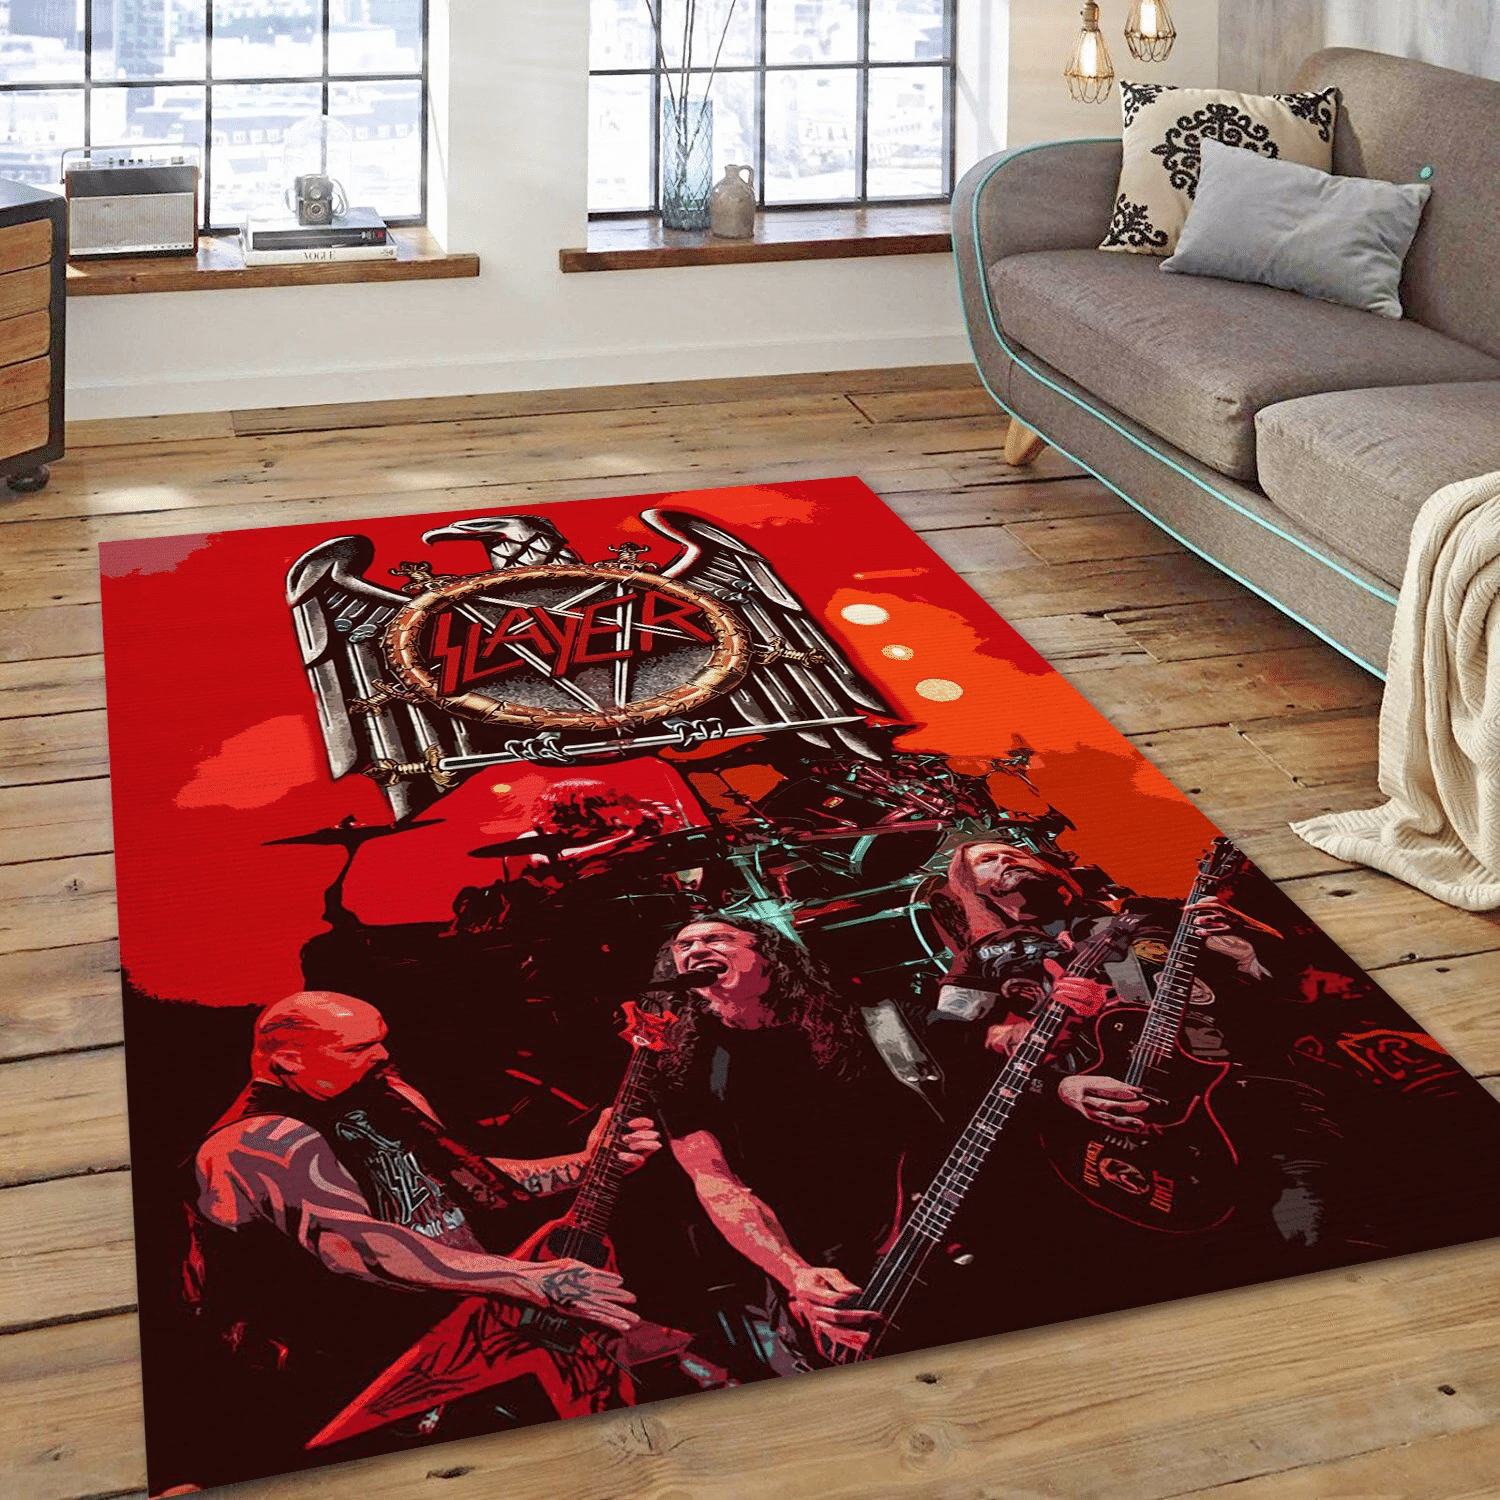 Slayer Band Music Area Rug, Living Room Rug - Family Gift US Decor - Indoor Outdoor Rugs 1